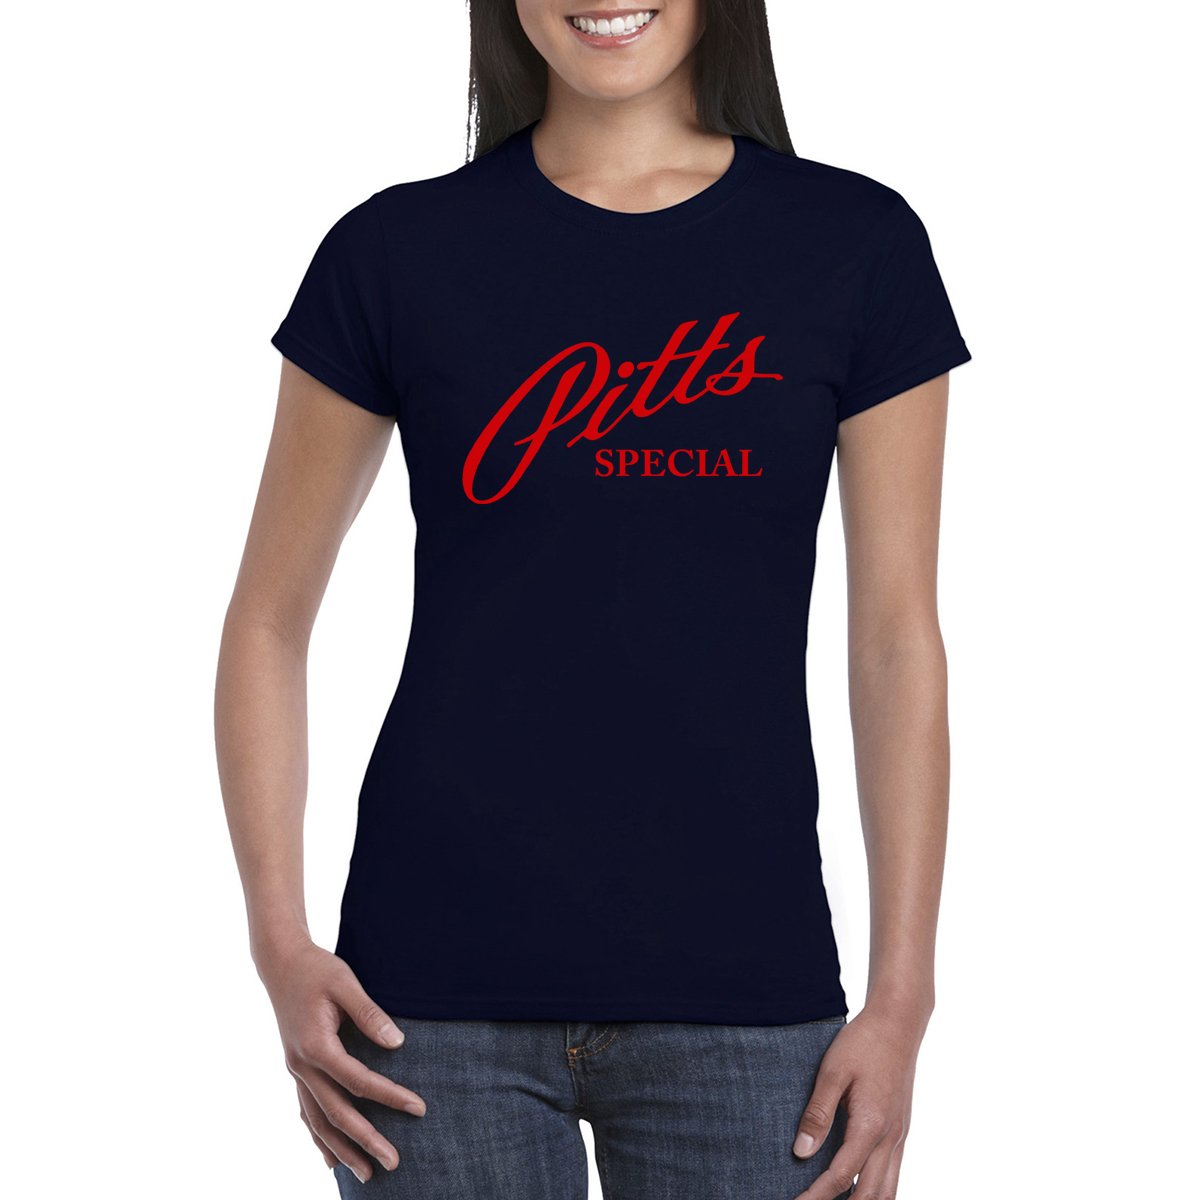 PITTS SPECIAL Women's Semi-Fitted T-Shirt